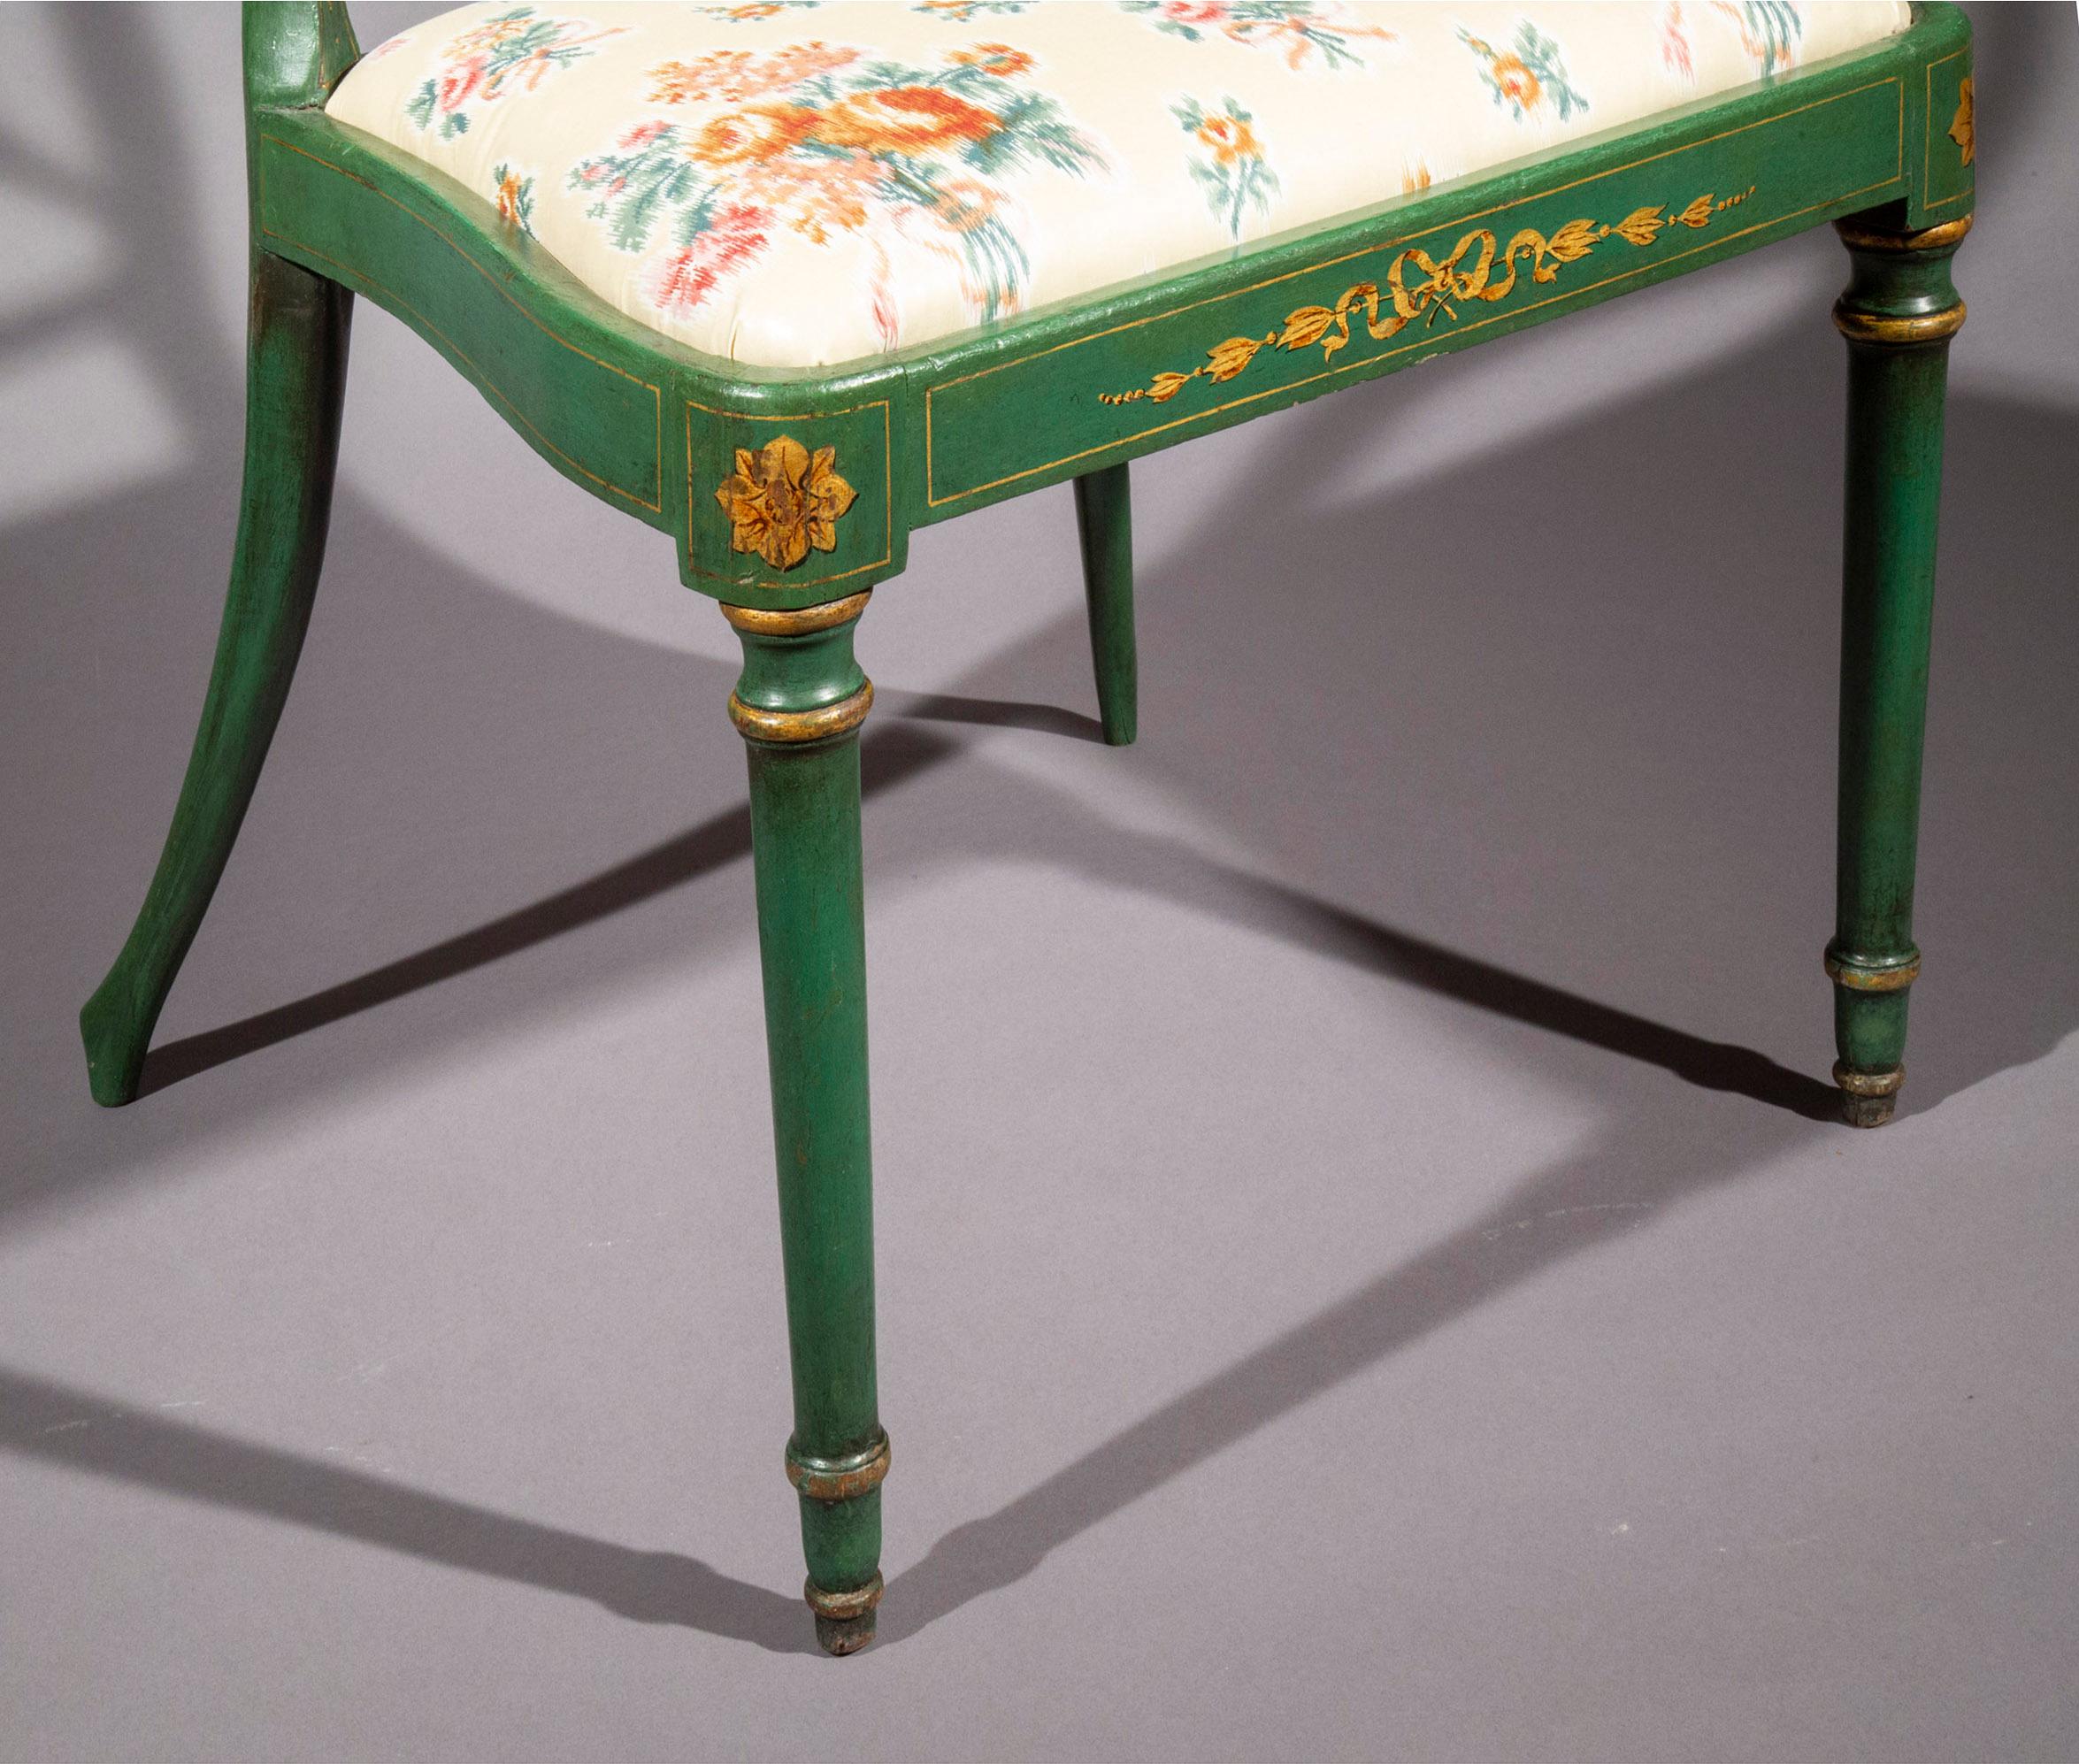 Pair of Antique Green Painted Chairs - 3 pairs available 4